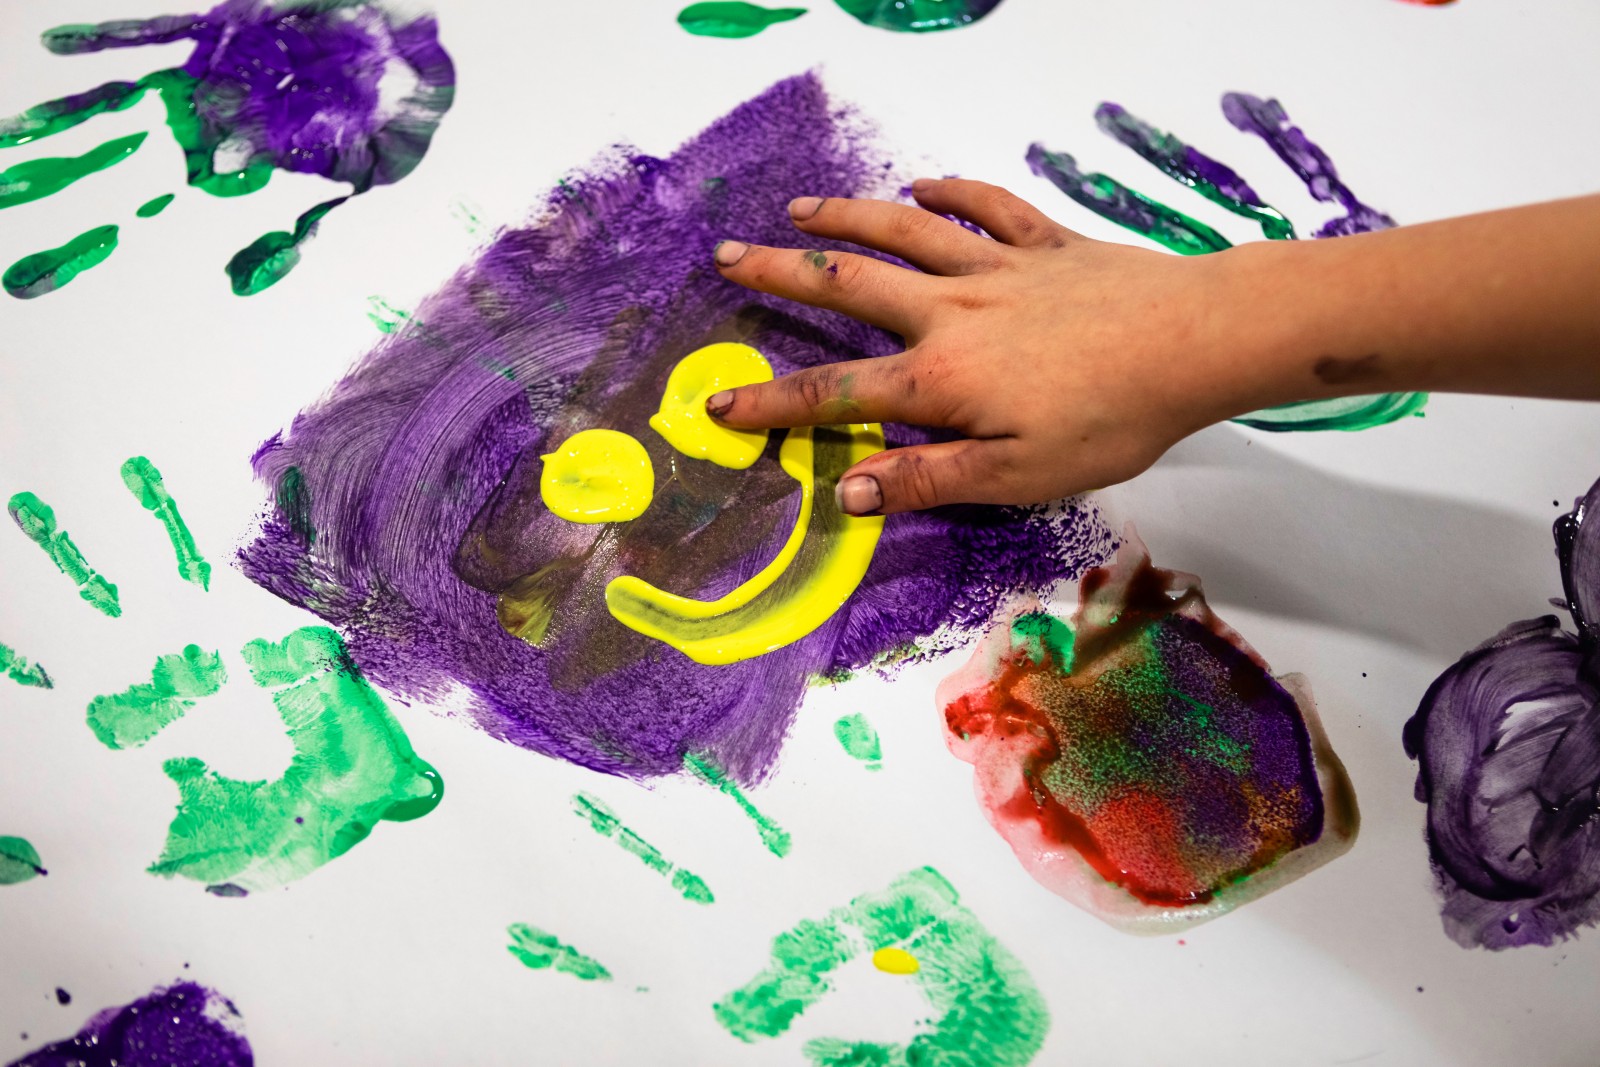 A piece of paper covered in green and purple hand prints. A child's hand draws a yellow smiley face against a purple background in the middle.